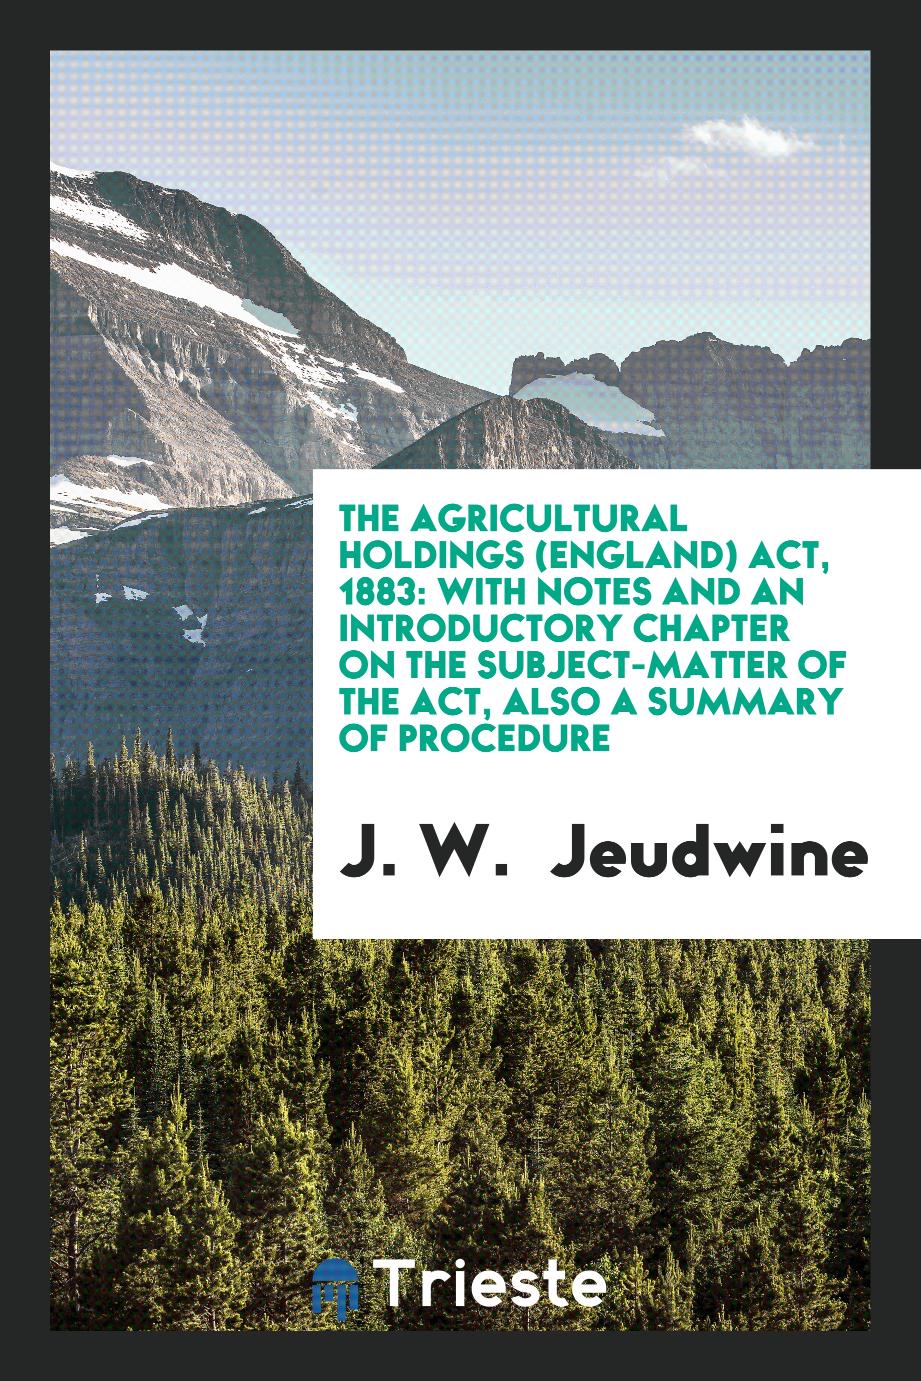 The Agricultural Holdings (England) Act, 1883: With Notes and an Introductory Chapter on the Subject-Matter of the Act, Also a Summary of Procedure